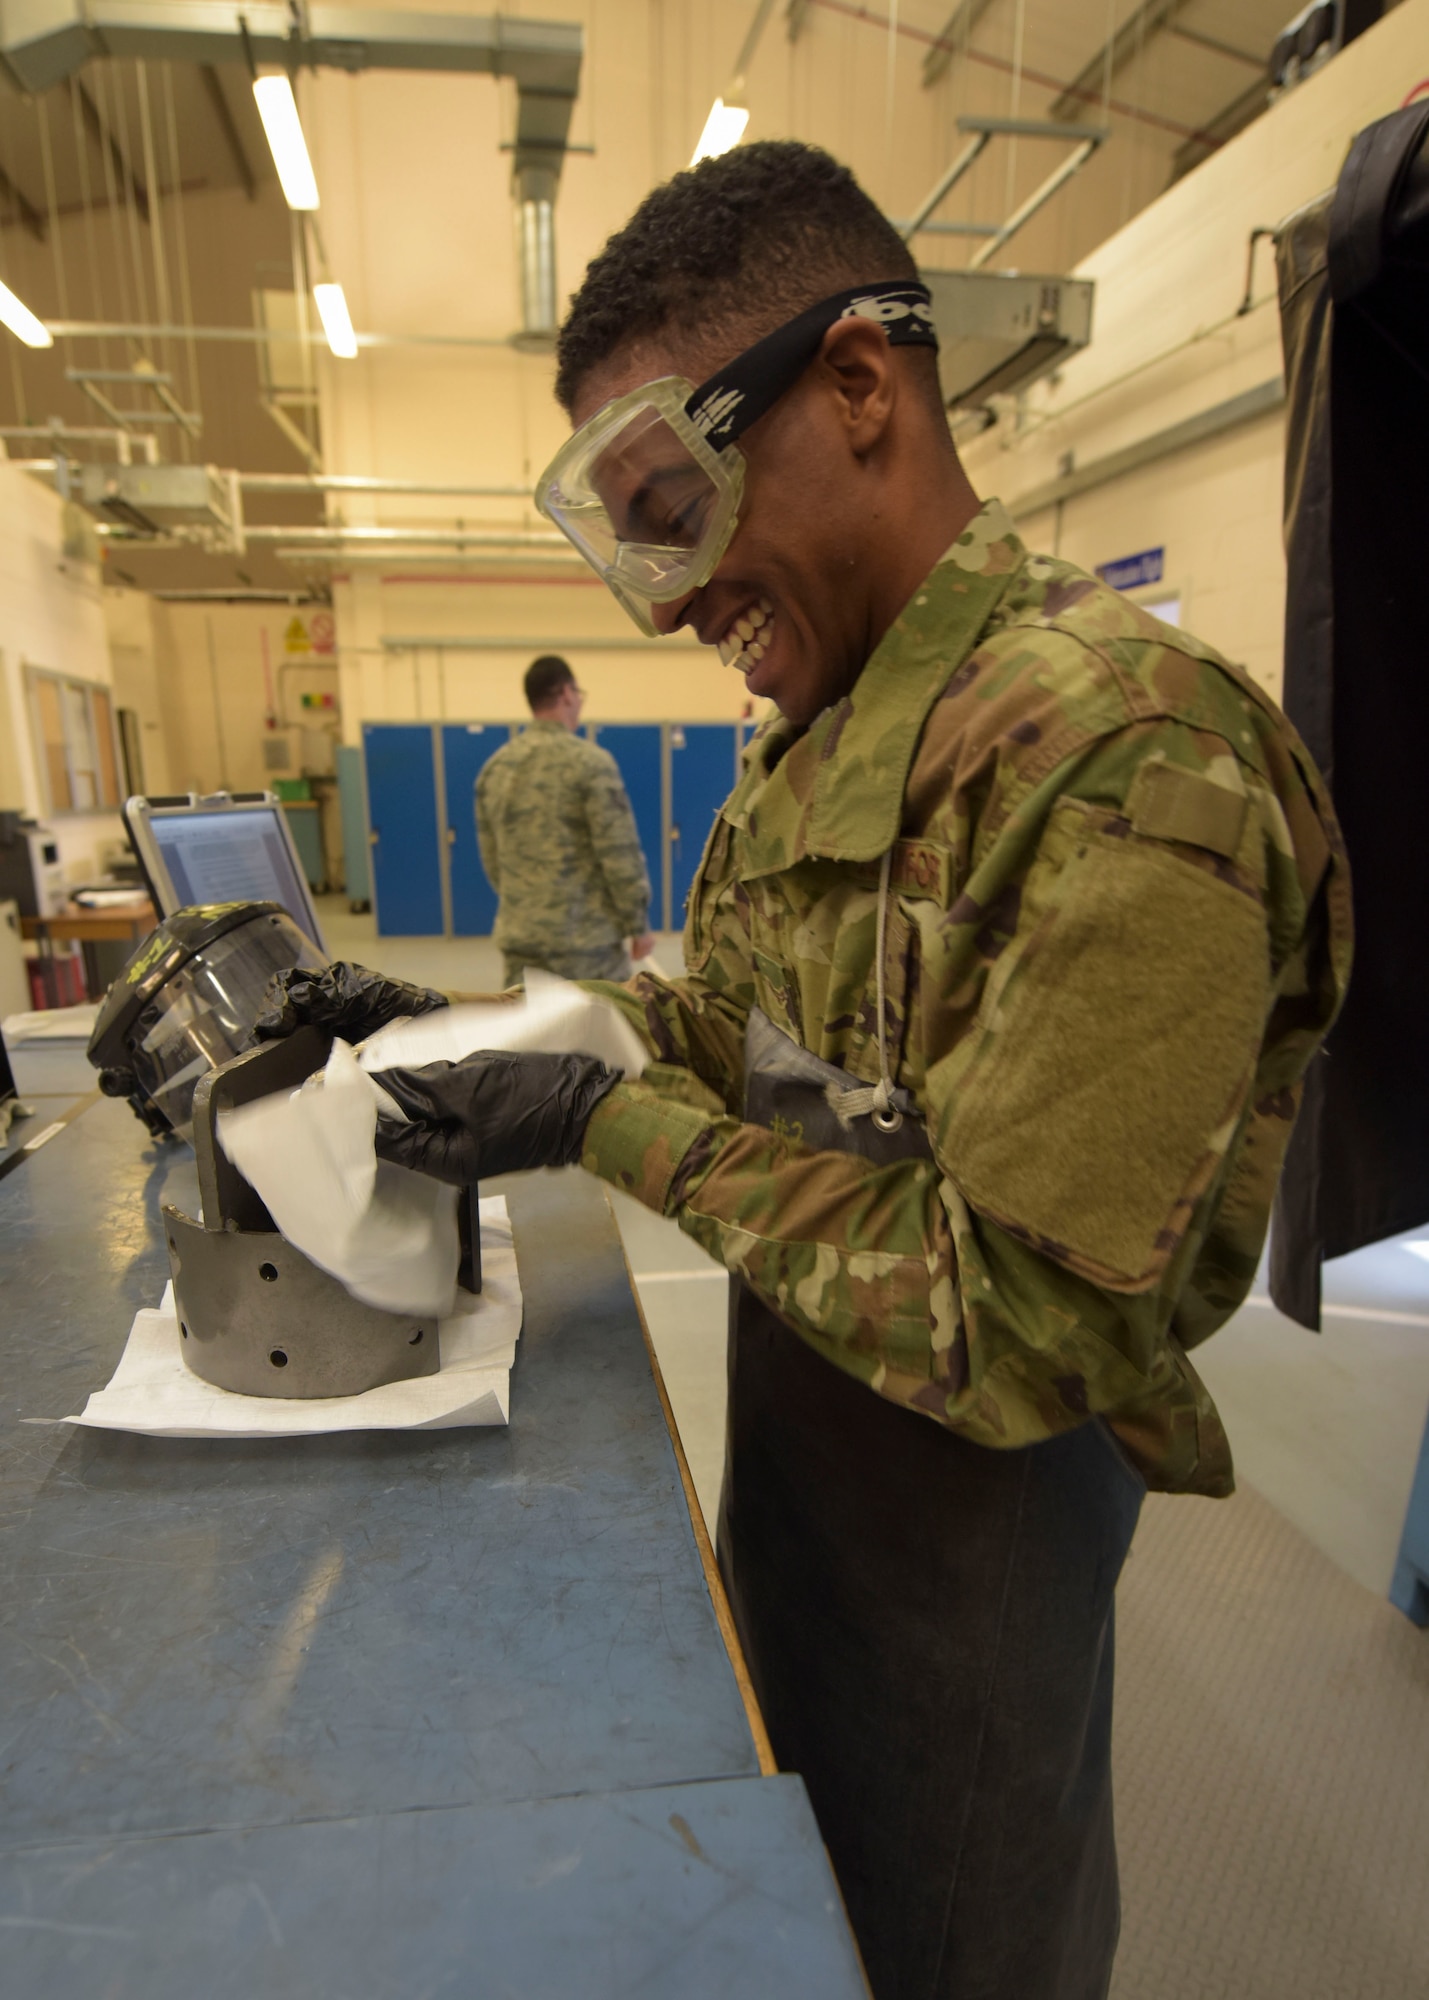 U.S. Air Force Airman 1st Class Clarence Bennett, 100th Maintenance Squadron non-destructive inspection apprentice, performs a magnetic particle inspection on sample part, at RAF Mildenhall, England, Feb. 7, 2019. The magnetic particle inspection is used to look for cracks on welded areas of equipment, varying from bolts, tow bars and other supporting aerospace ground equipment. (U.S. Air Force photo by Airman 1st Class Alexandria Lee)